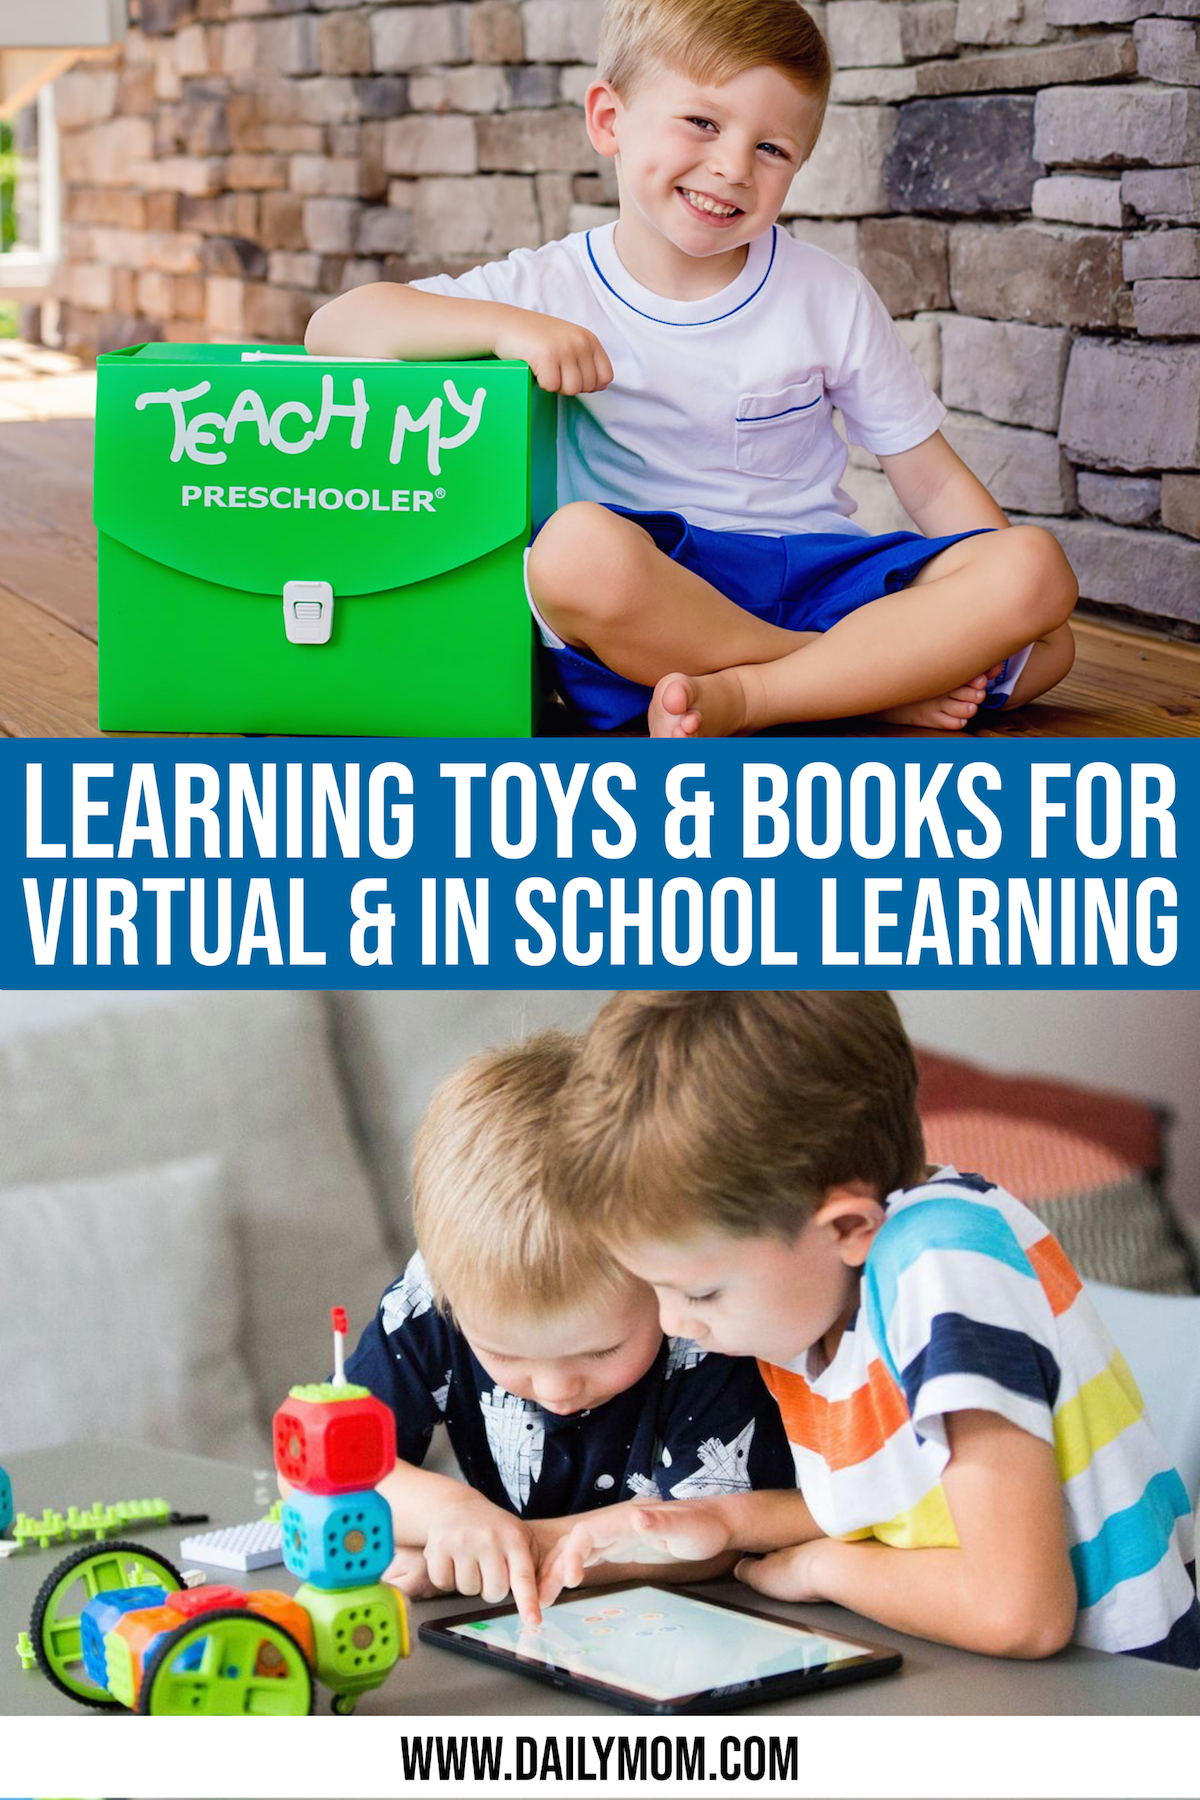 20 Awesome Learning Toys And Books To Help With Virtual Or In School Learning